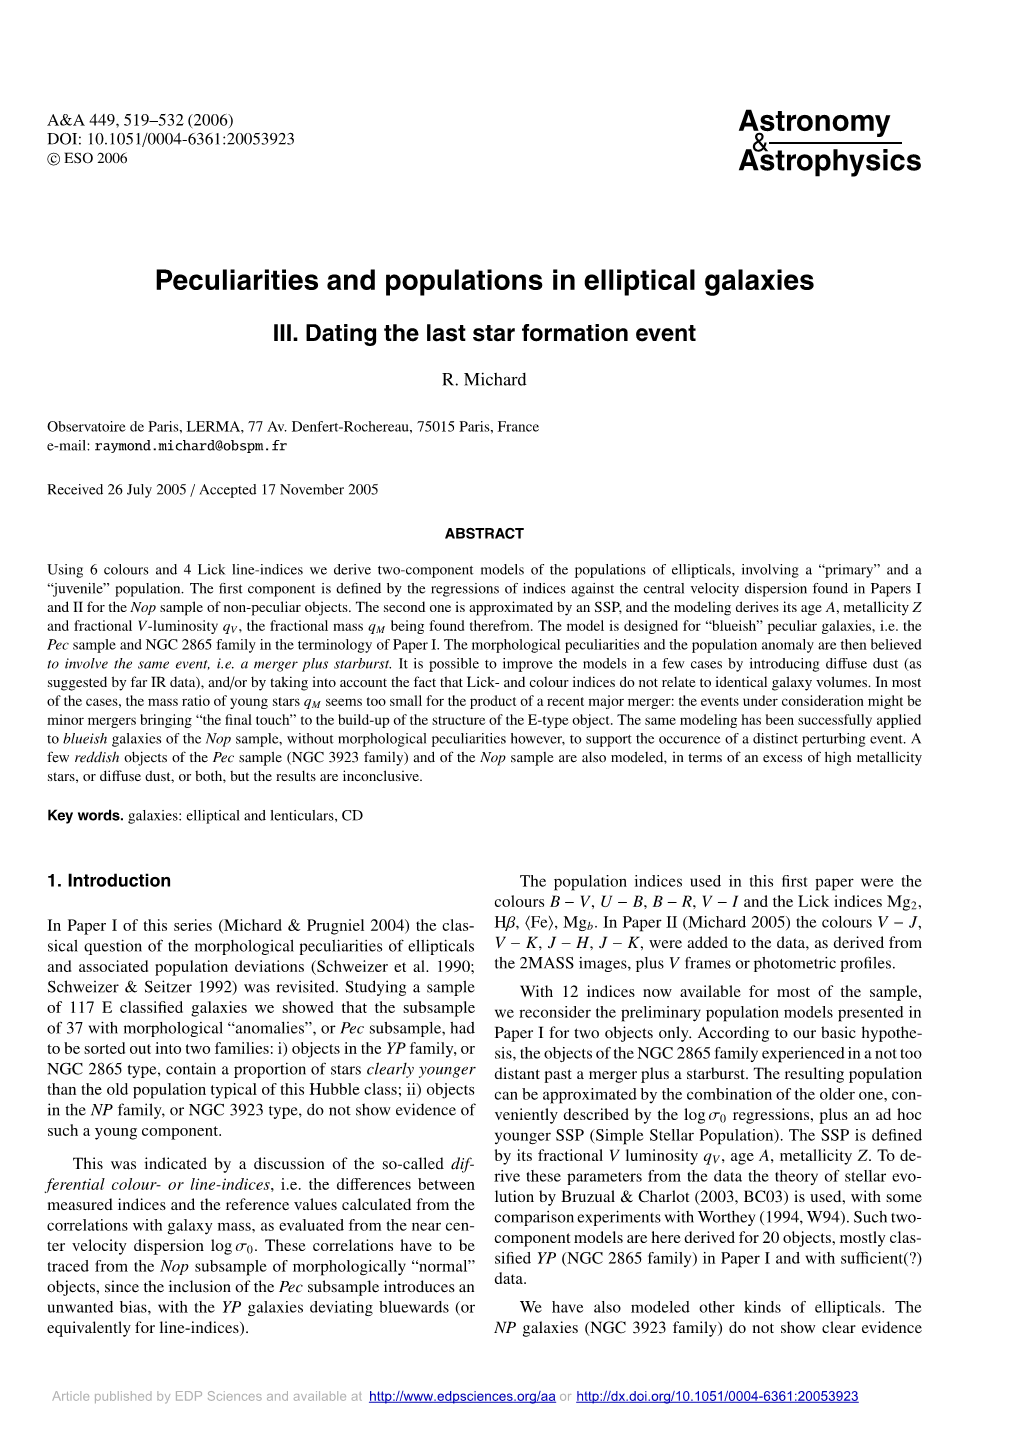 Peculiarities and Populations in Elliptical Galaxies